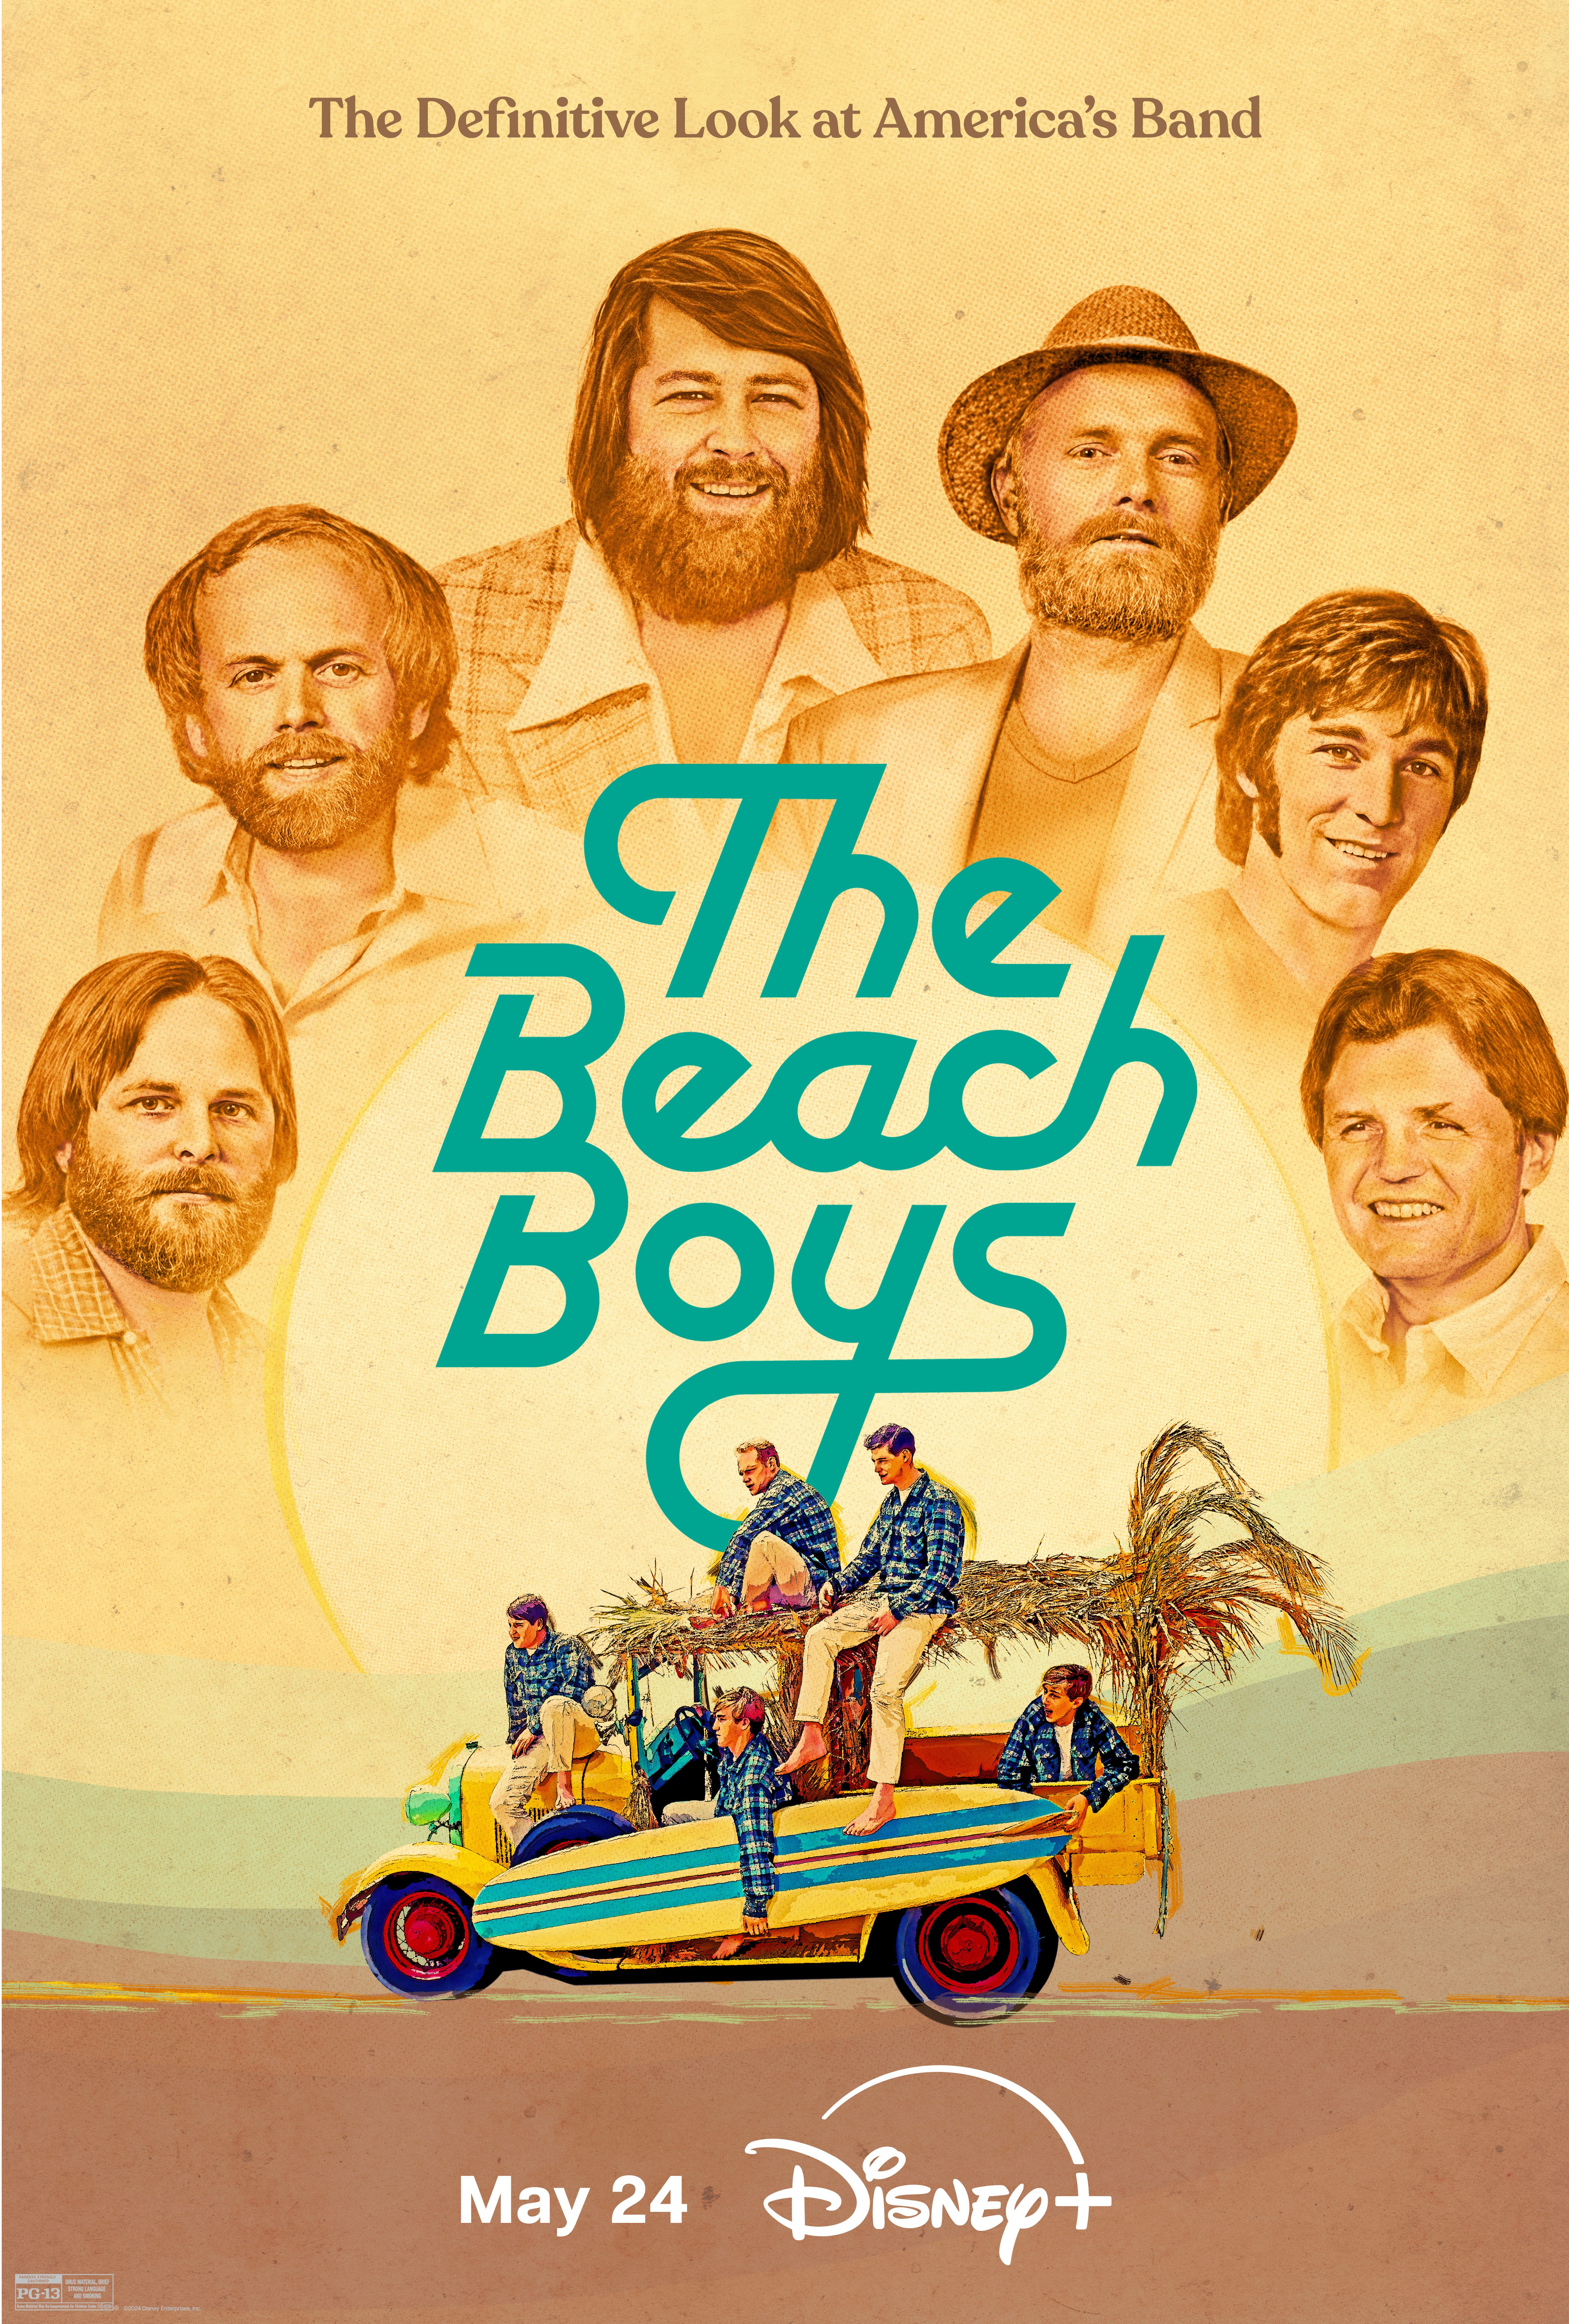 Poster art for The Beach Boys Documentary featuring the band in a car headed to the beach and their faces around the sun